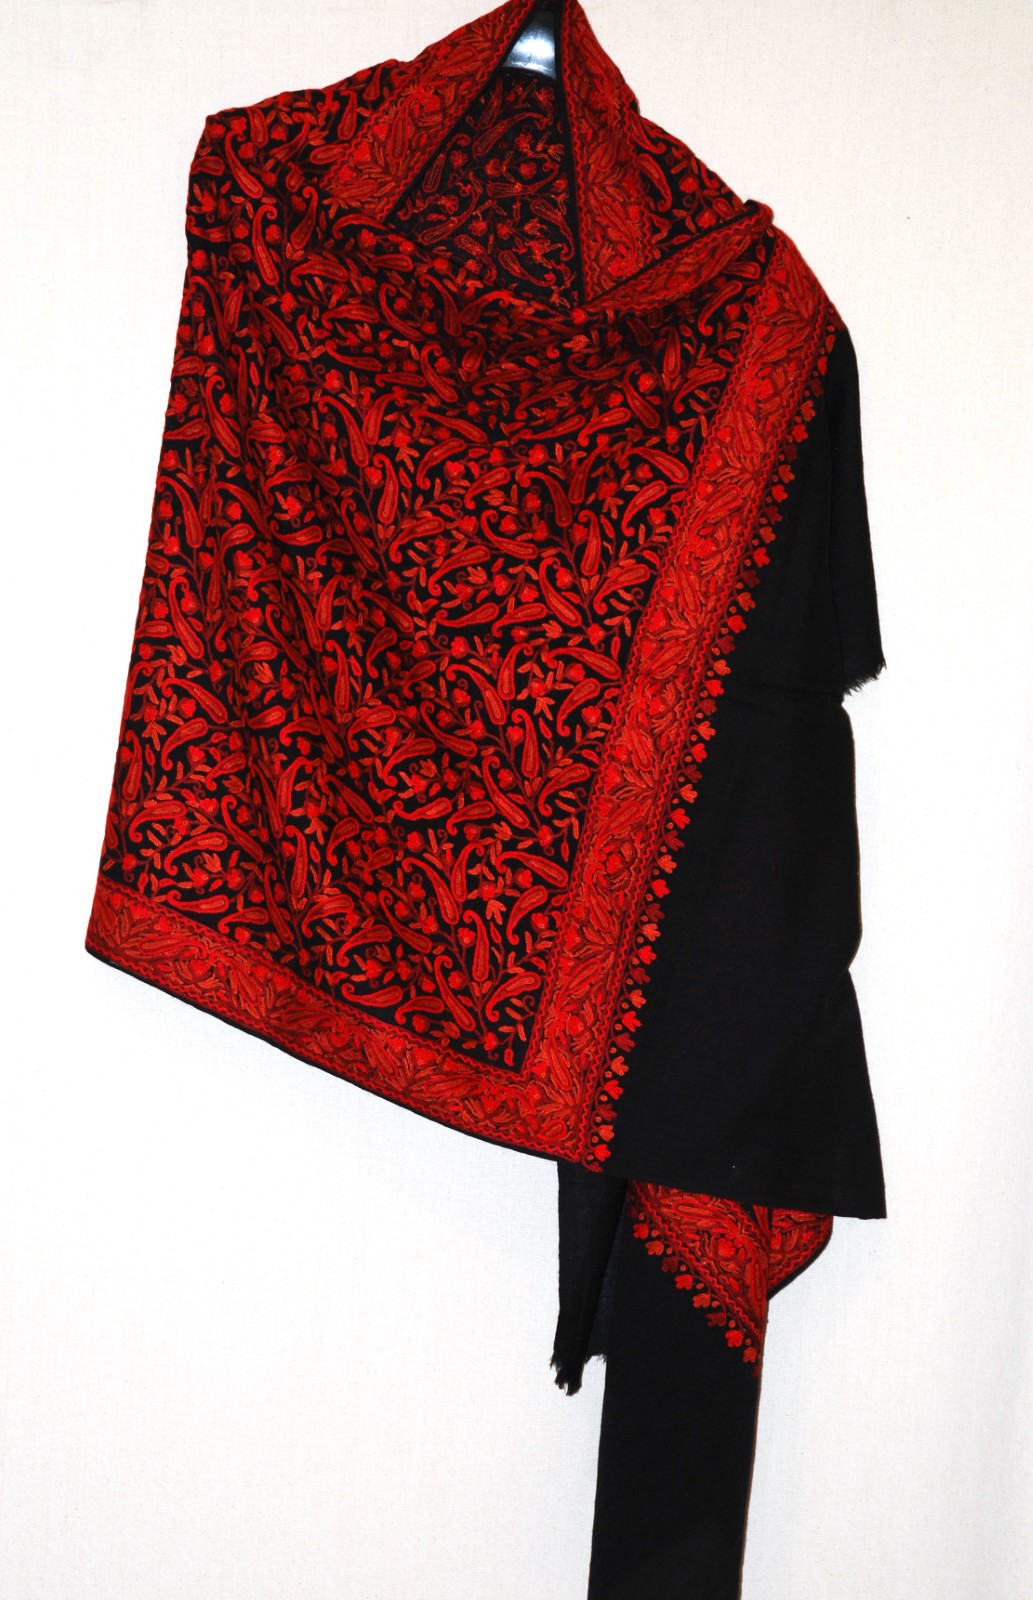 Hand Embroidered Woolen Shawl Wrap Throw Black, Red Embroidery #WS-125